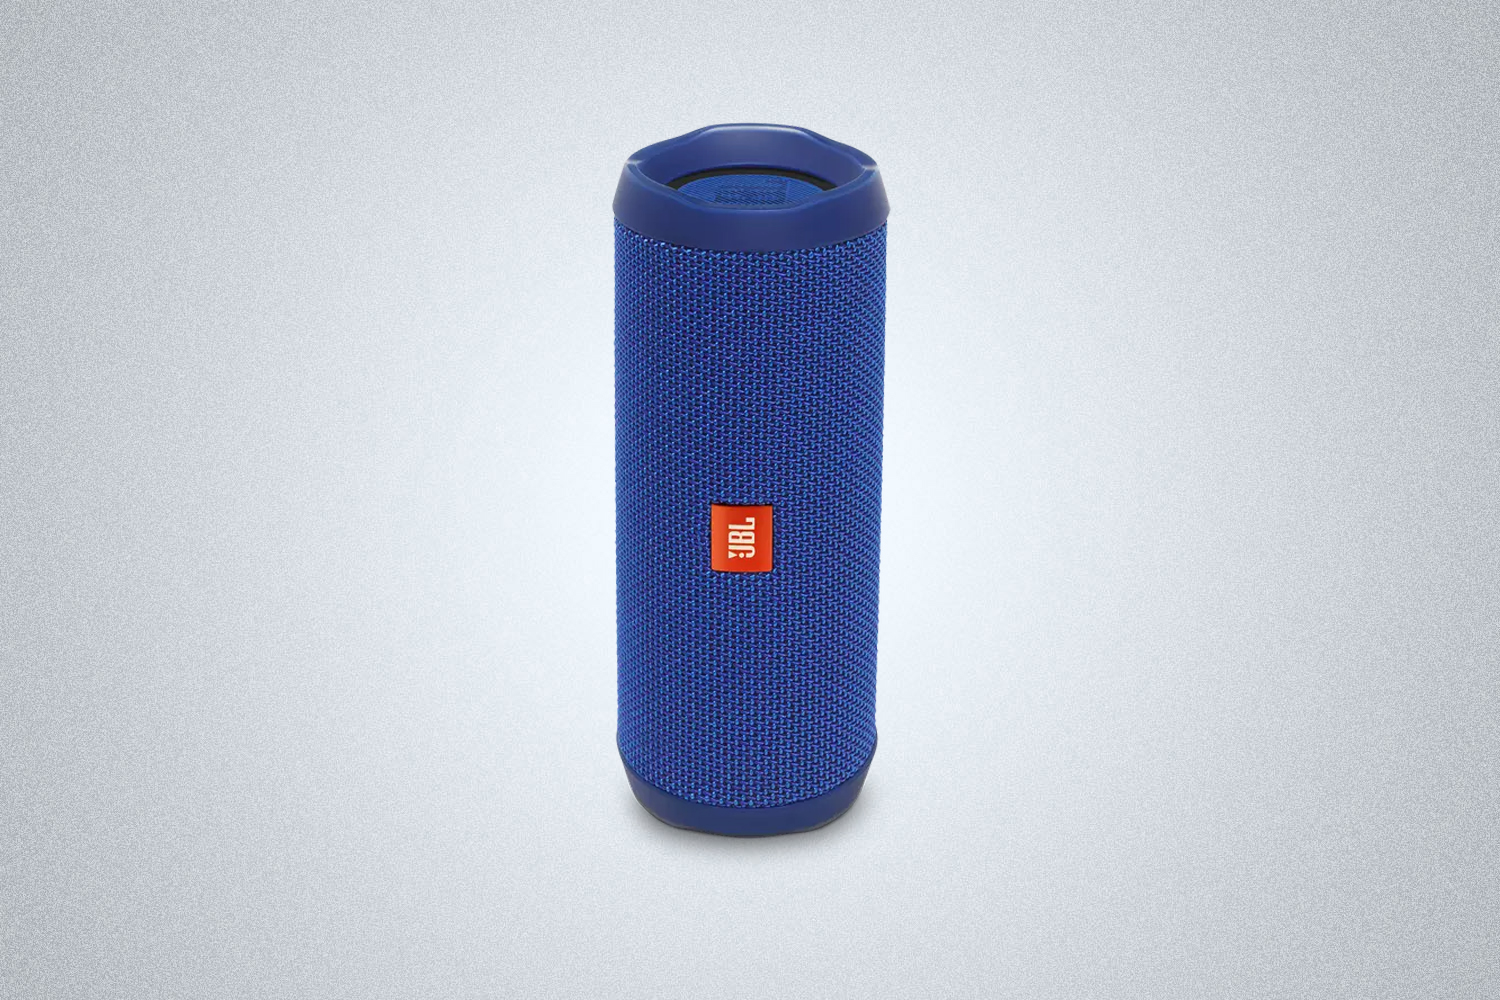 The JBL Flip 4 is one of the best Father's Day gifts to give for less than $100 in 2022